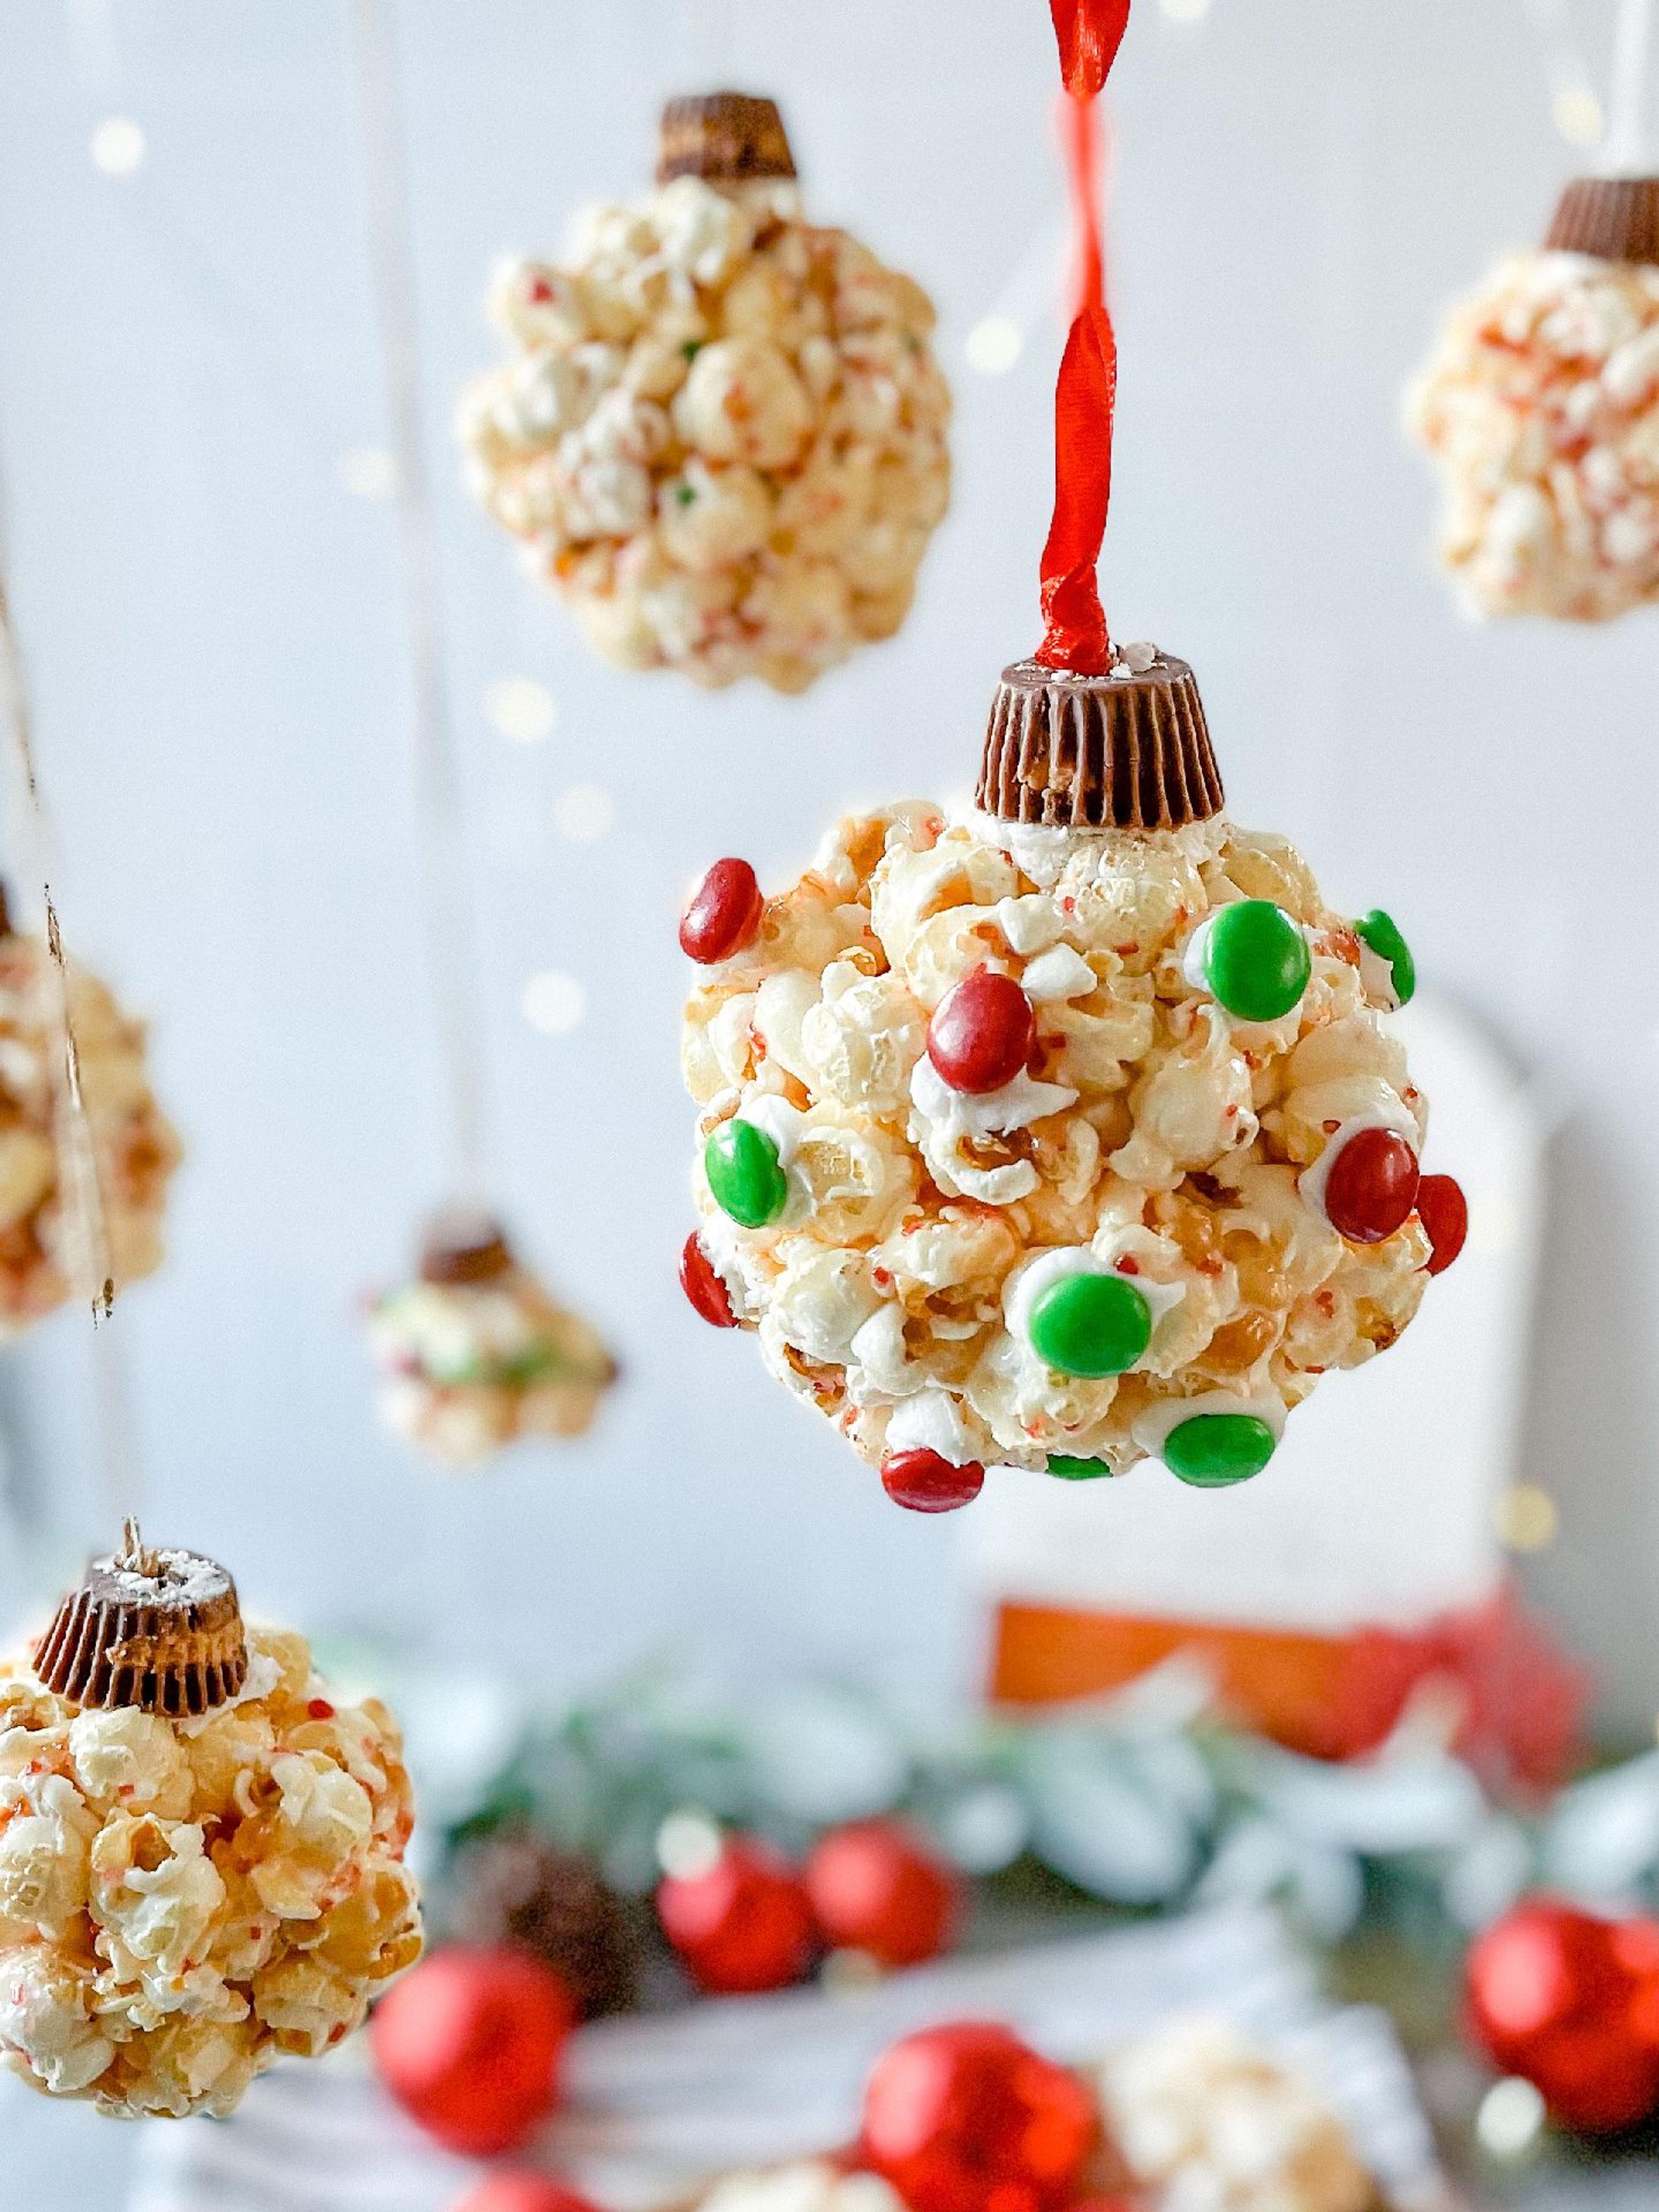 How to Make Popcorn Balls with a Popcorn Ball Maker from JustPoppin 